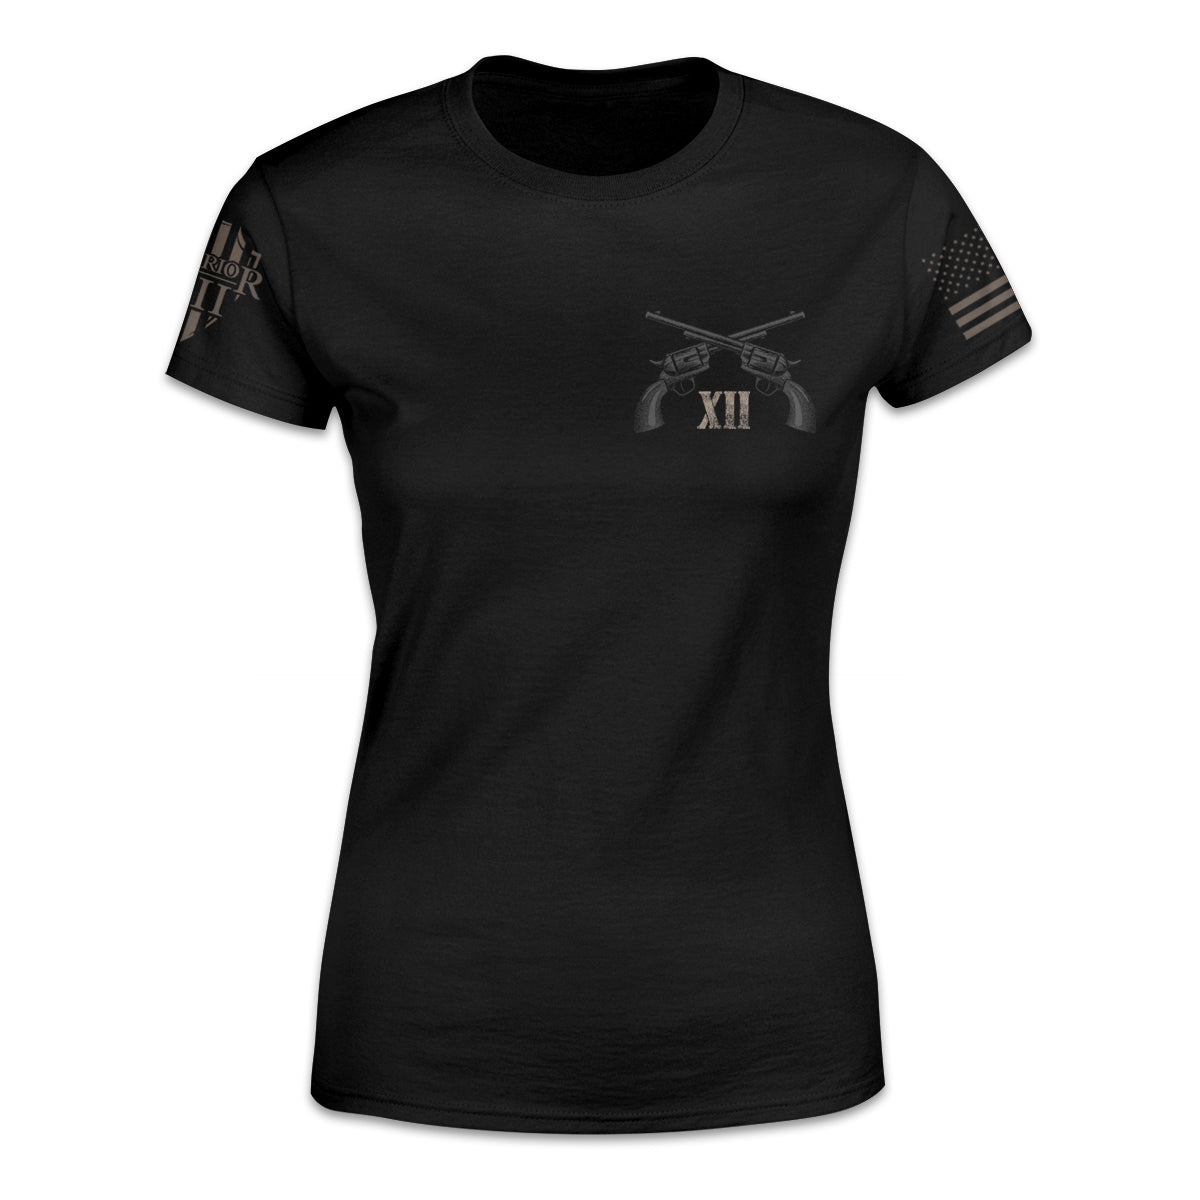 A black women's relaxed fit'shirt with two pistols crossed over with the Roman numerals XII printed on the front of the shirt.